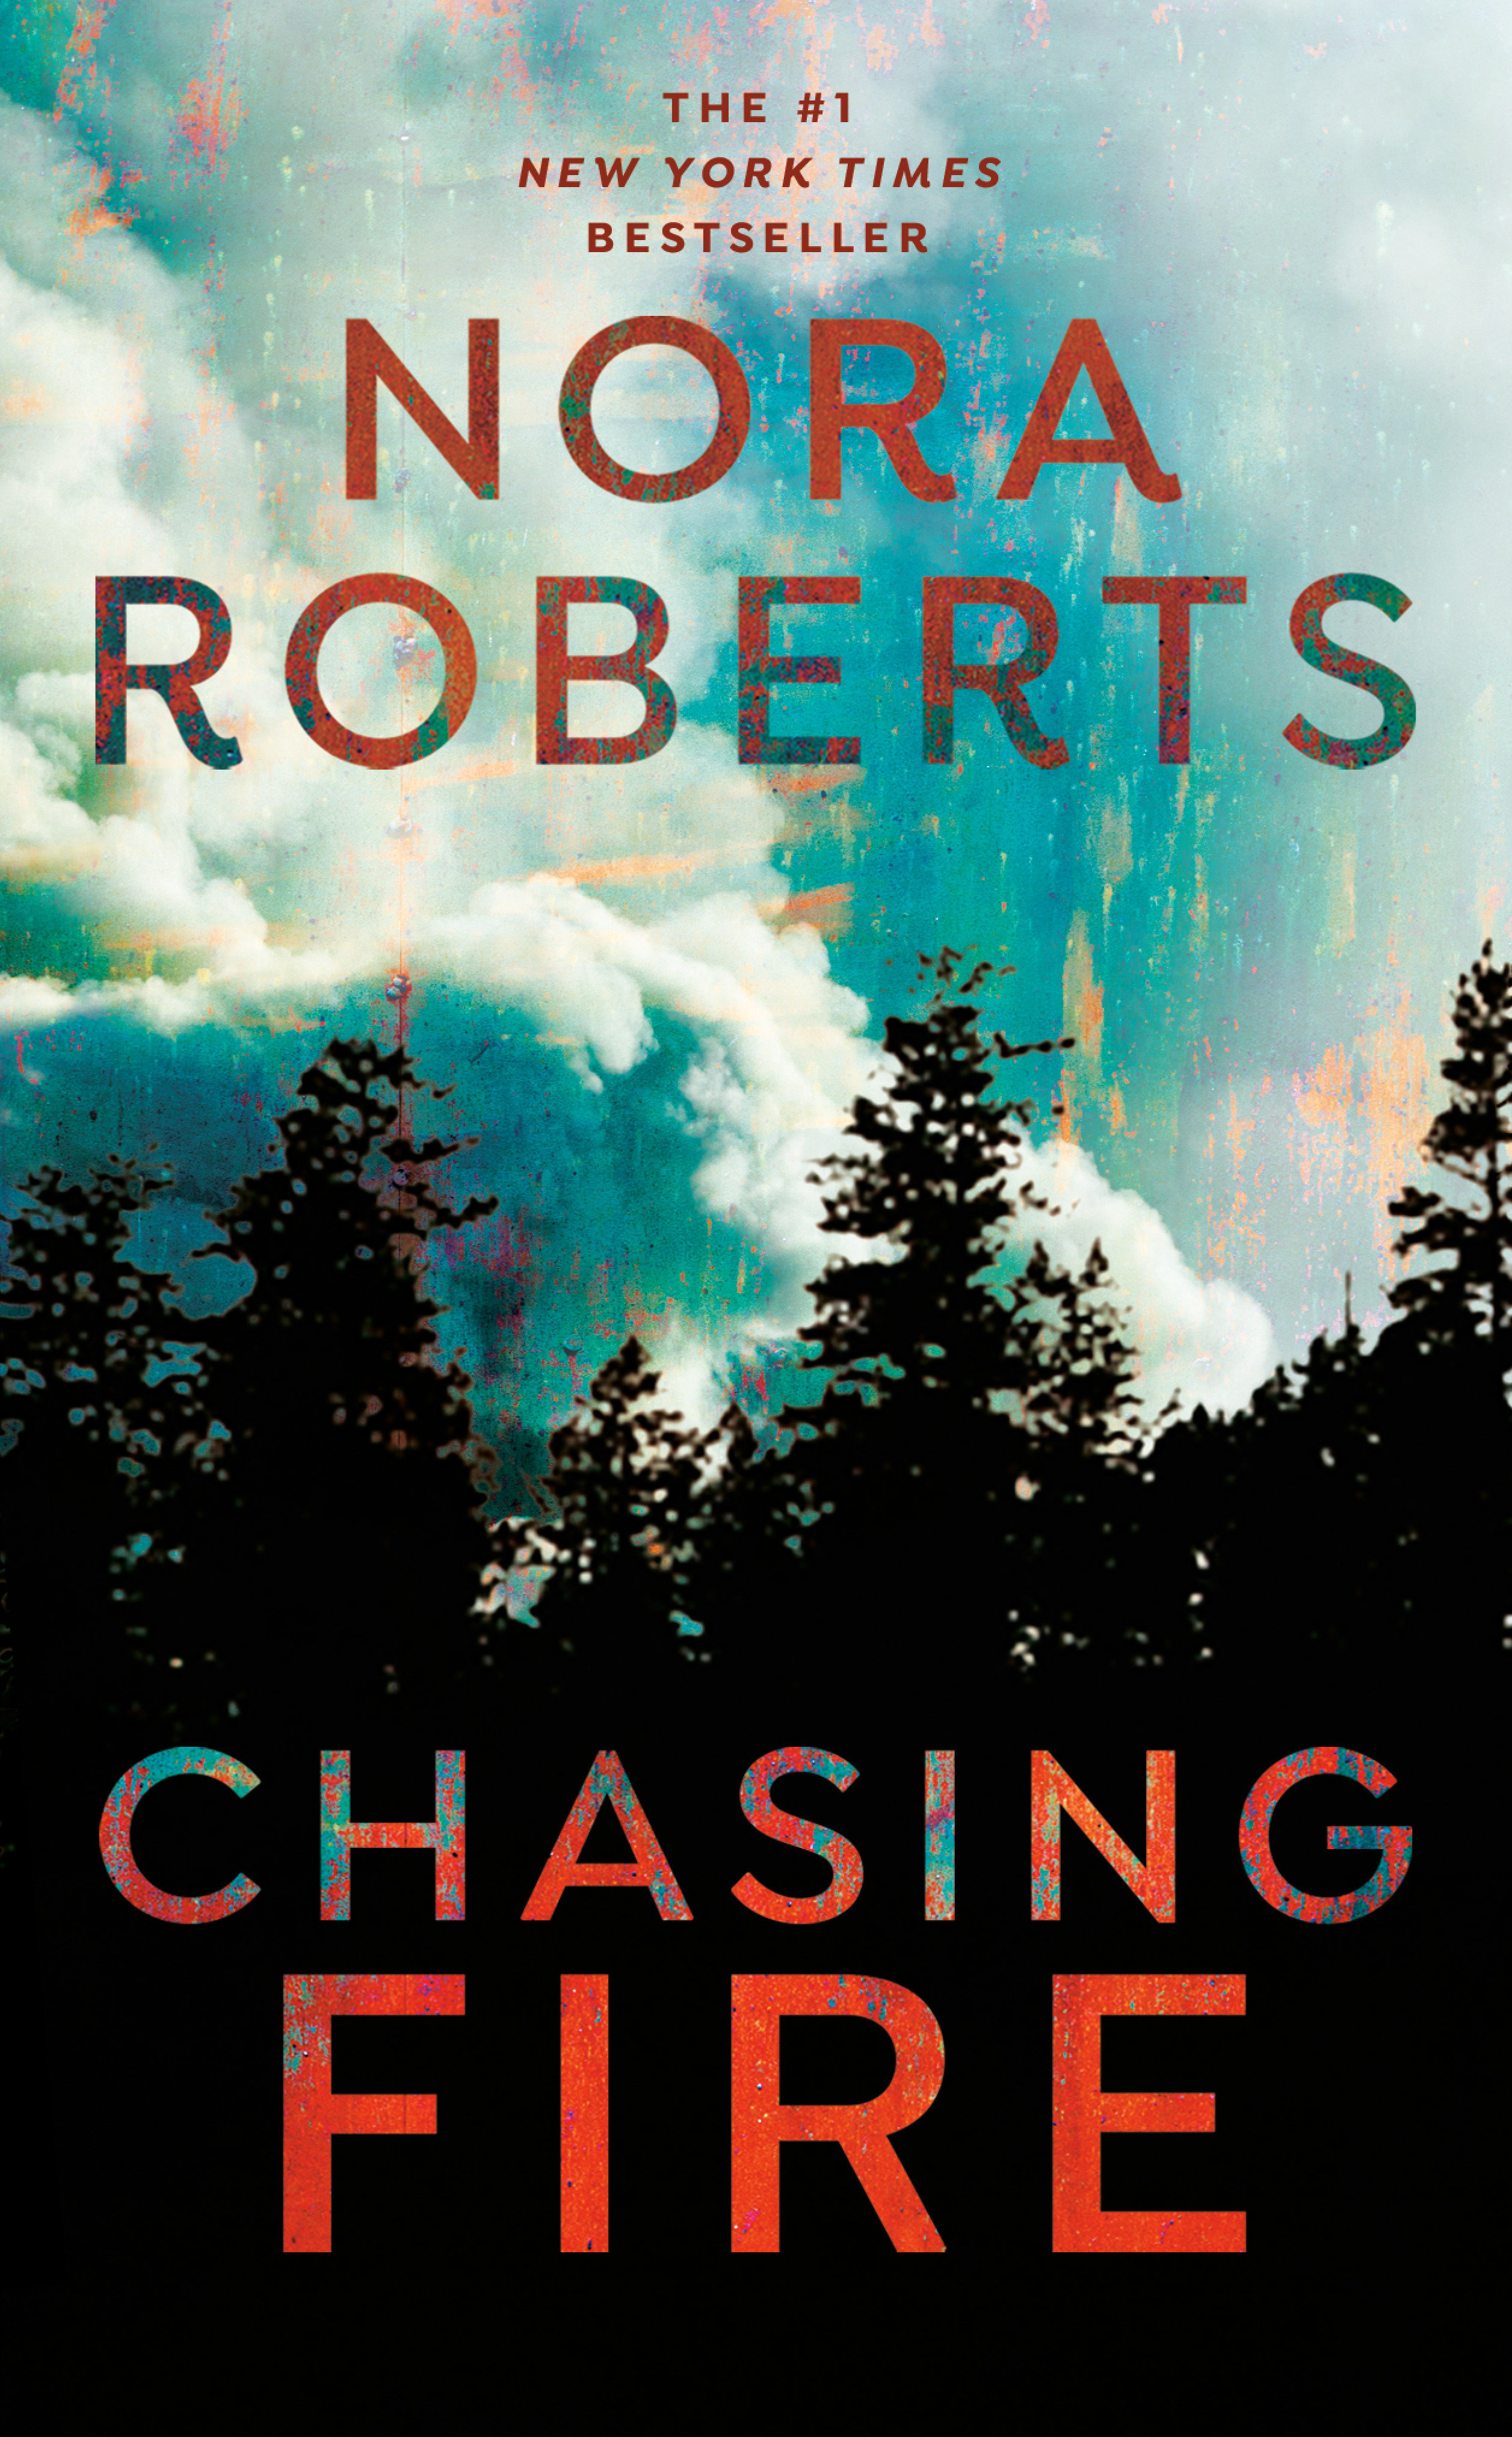 Chasing fire cover image